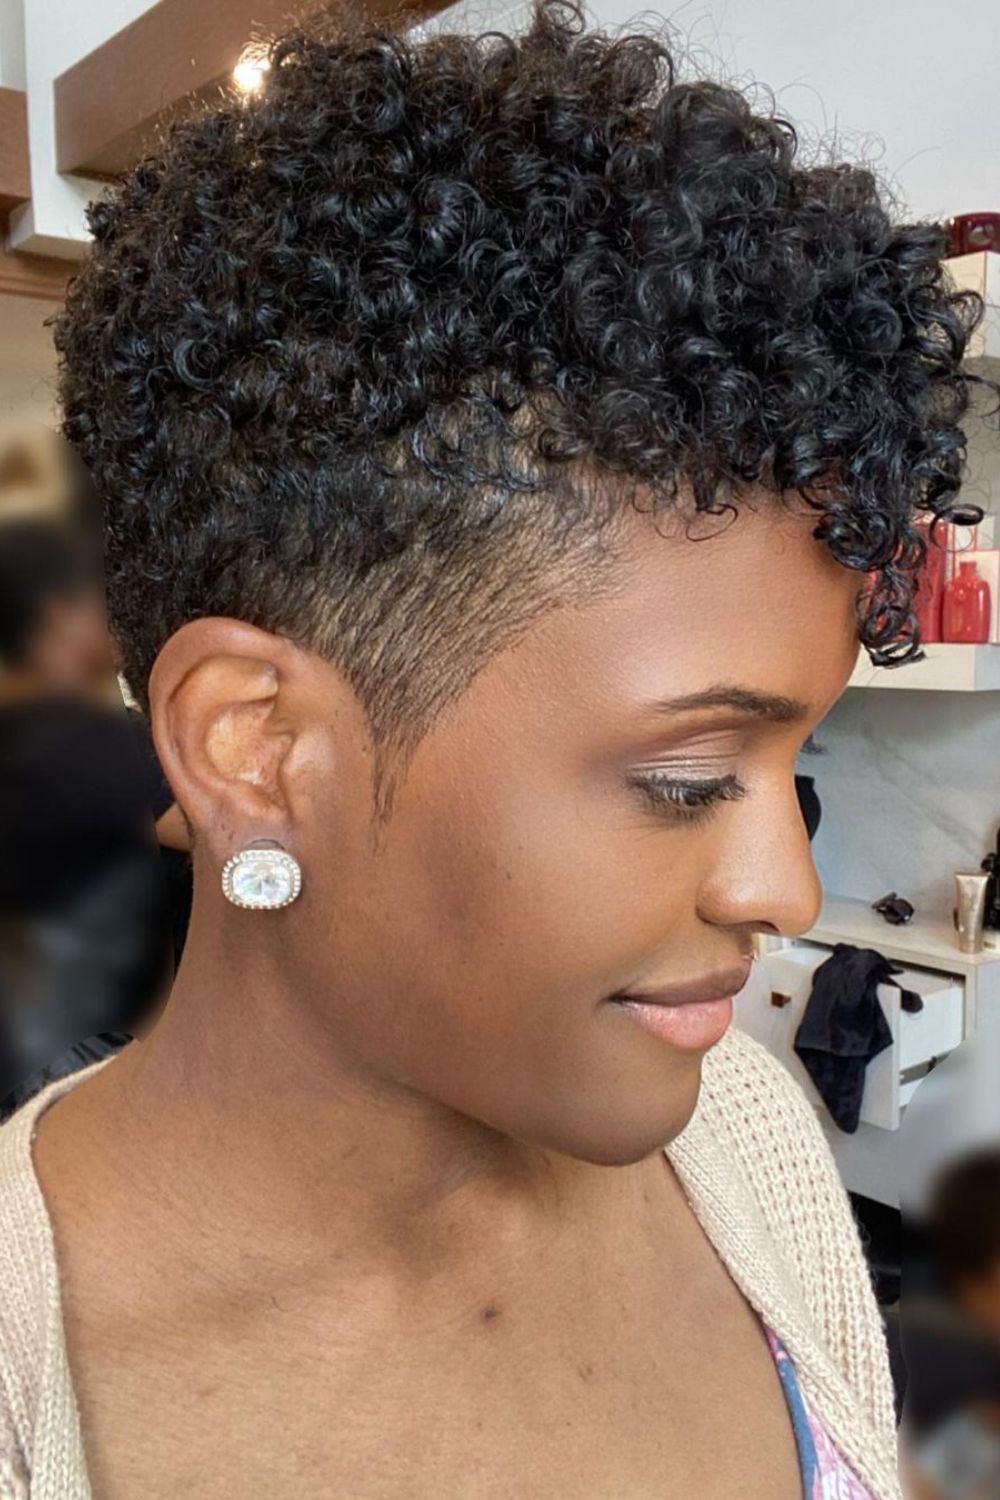 A black woman with a tapered pixie cut.